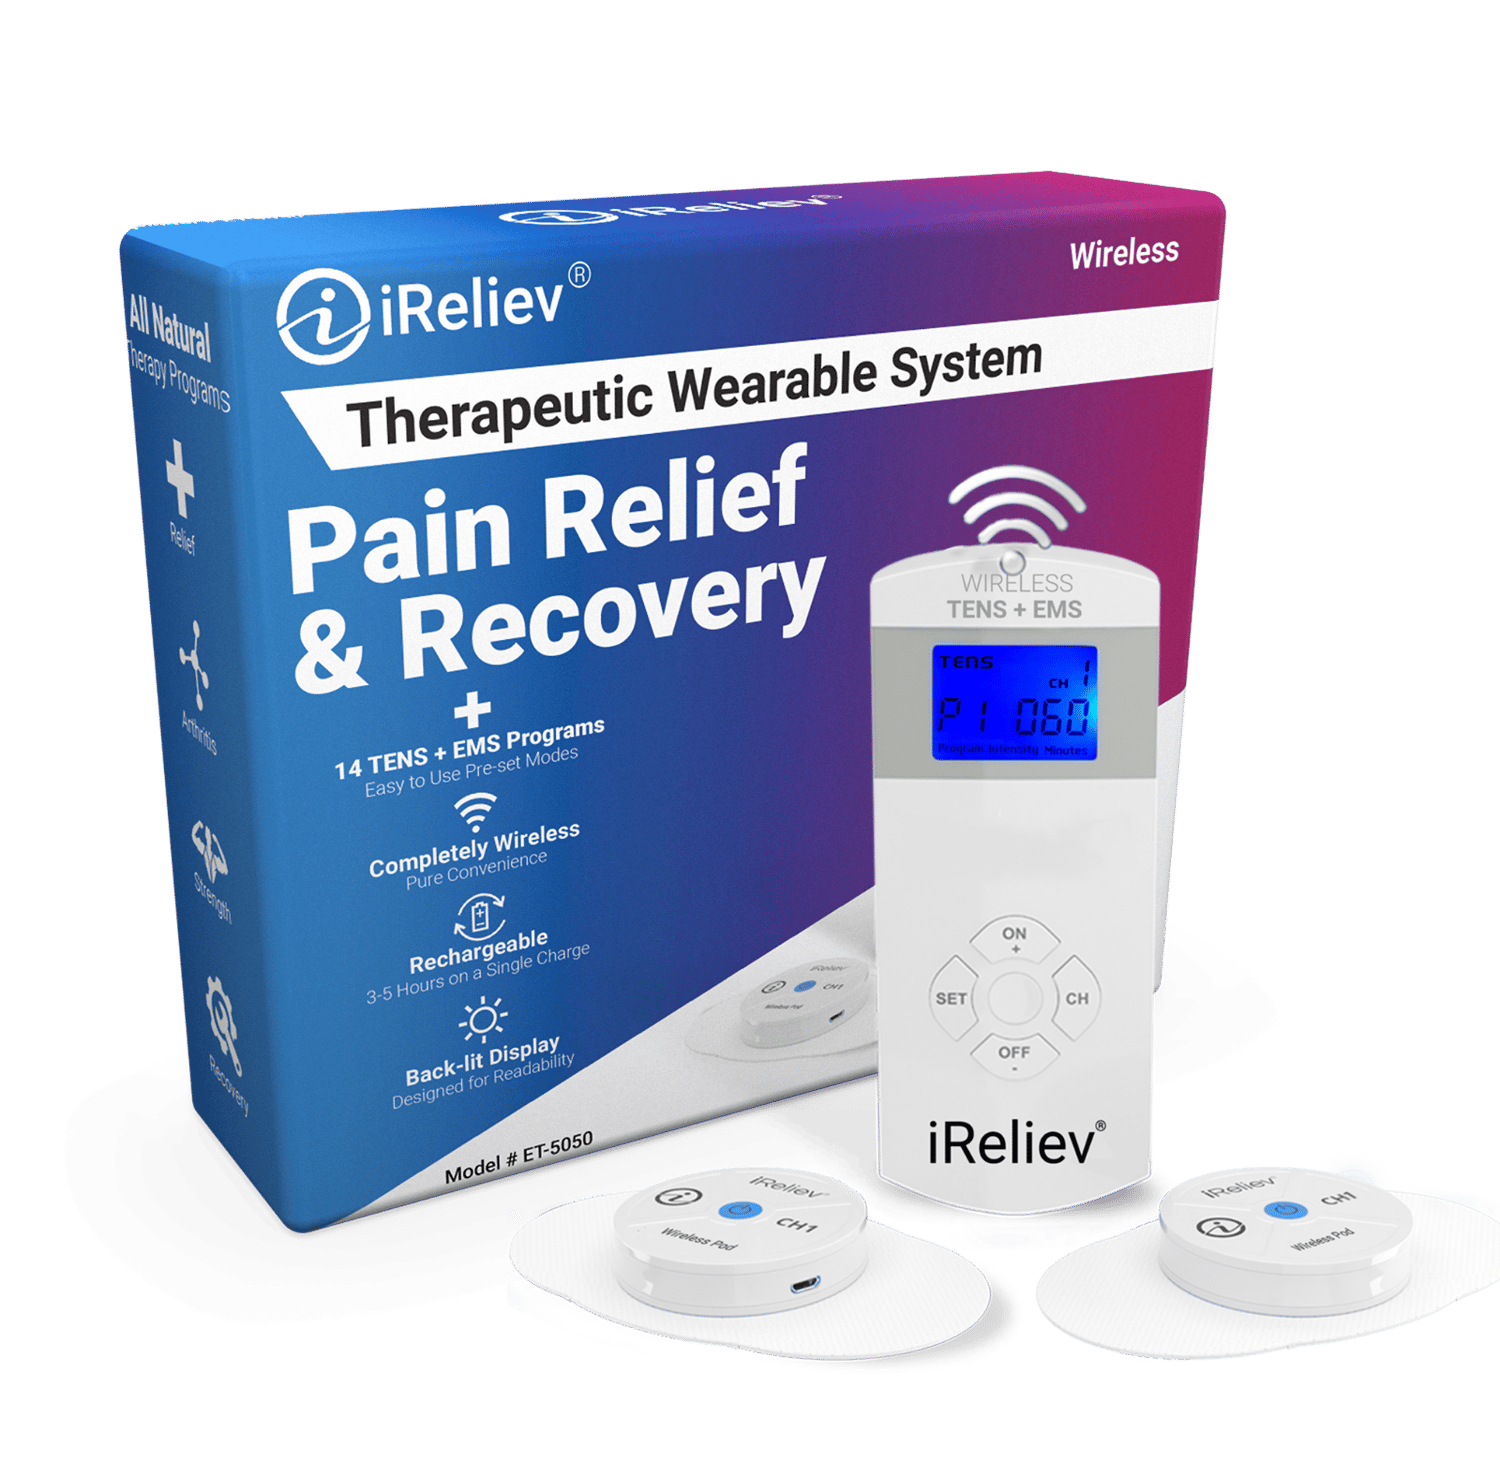 iReliev Pain Relief and recovery system